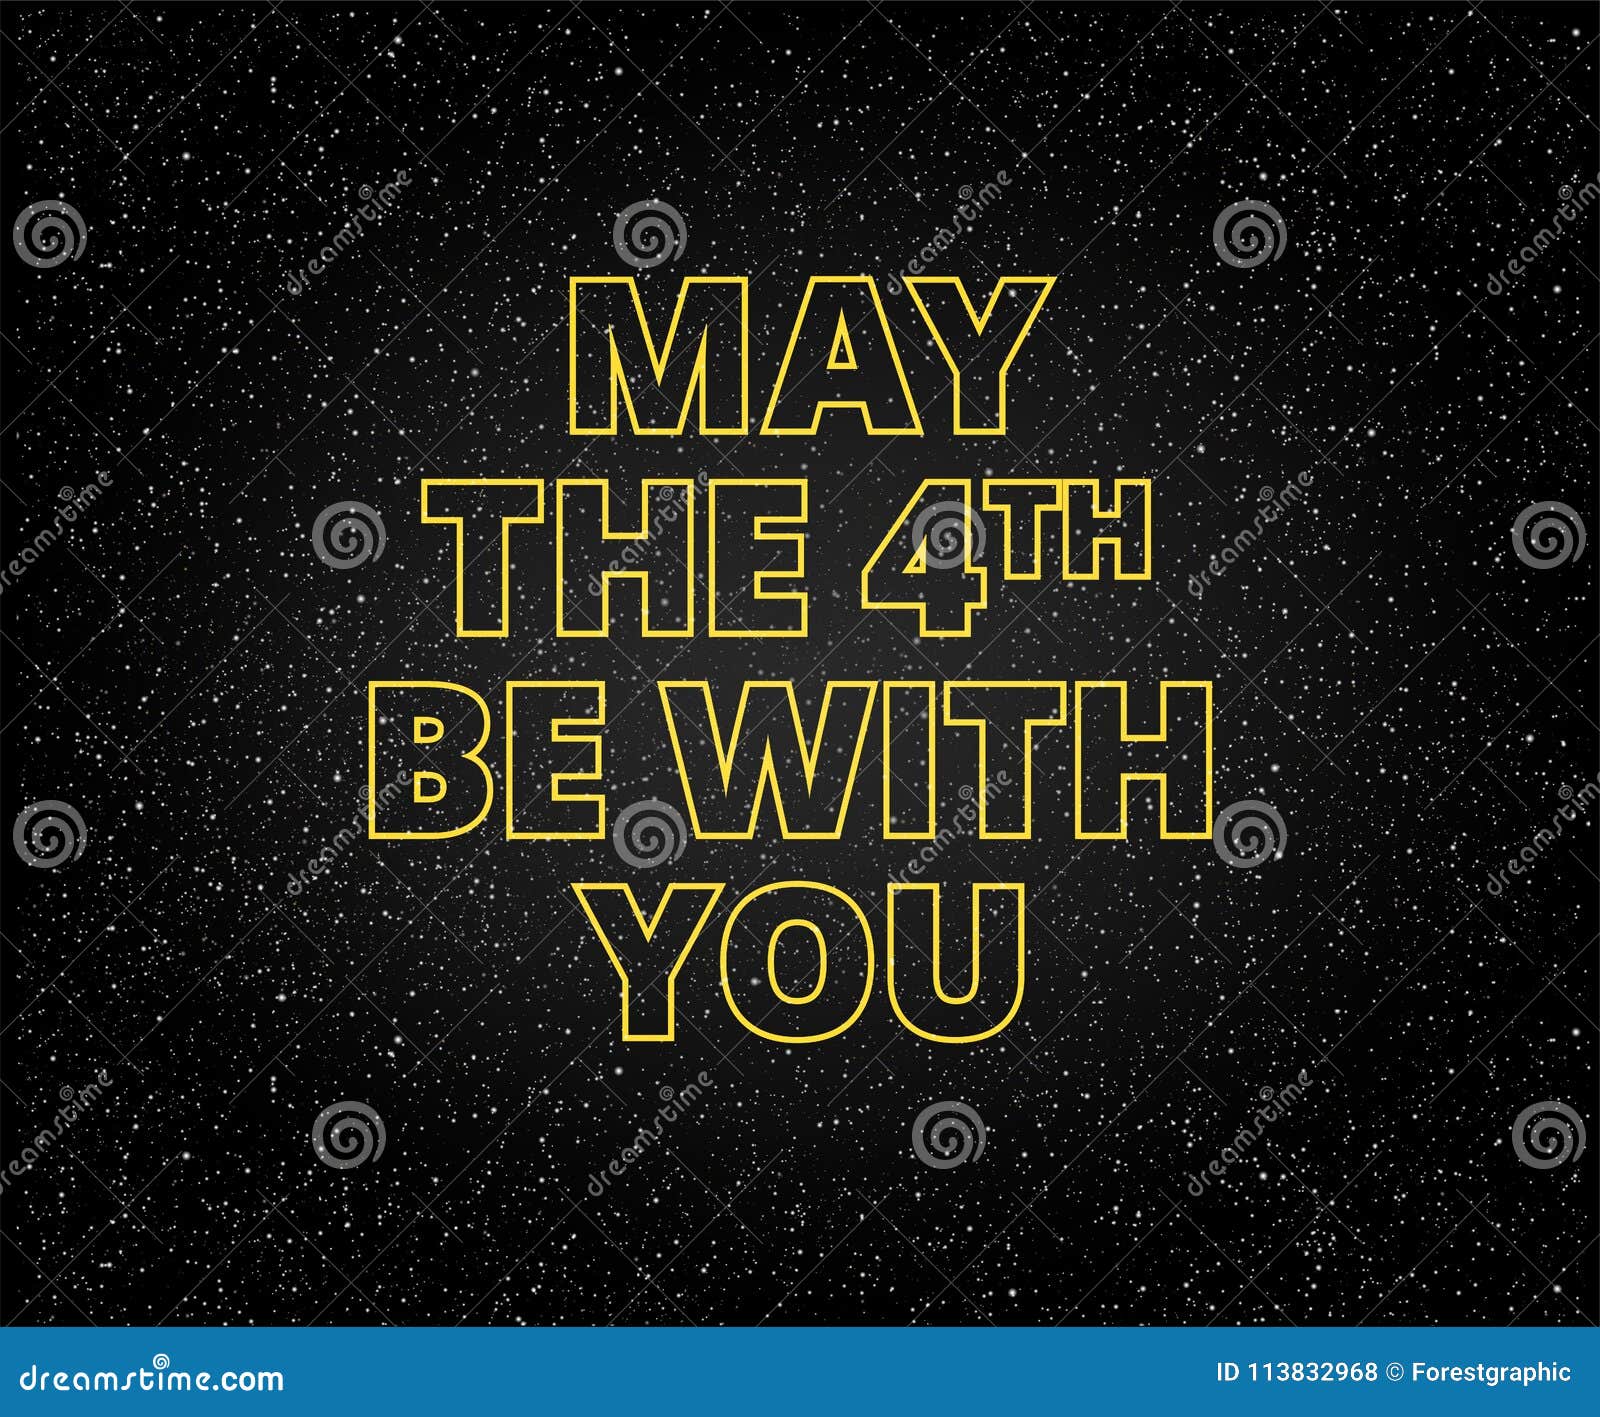 may the 4th be with you holiday background